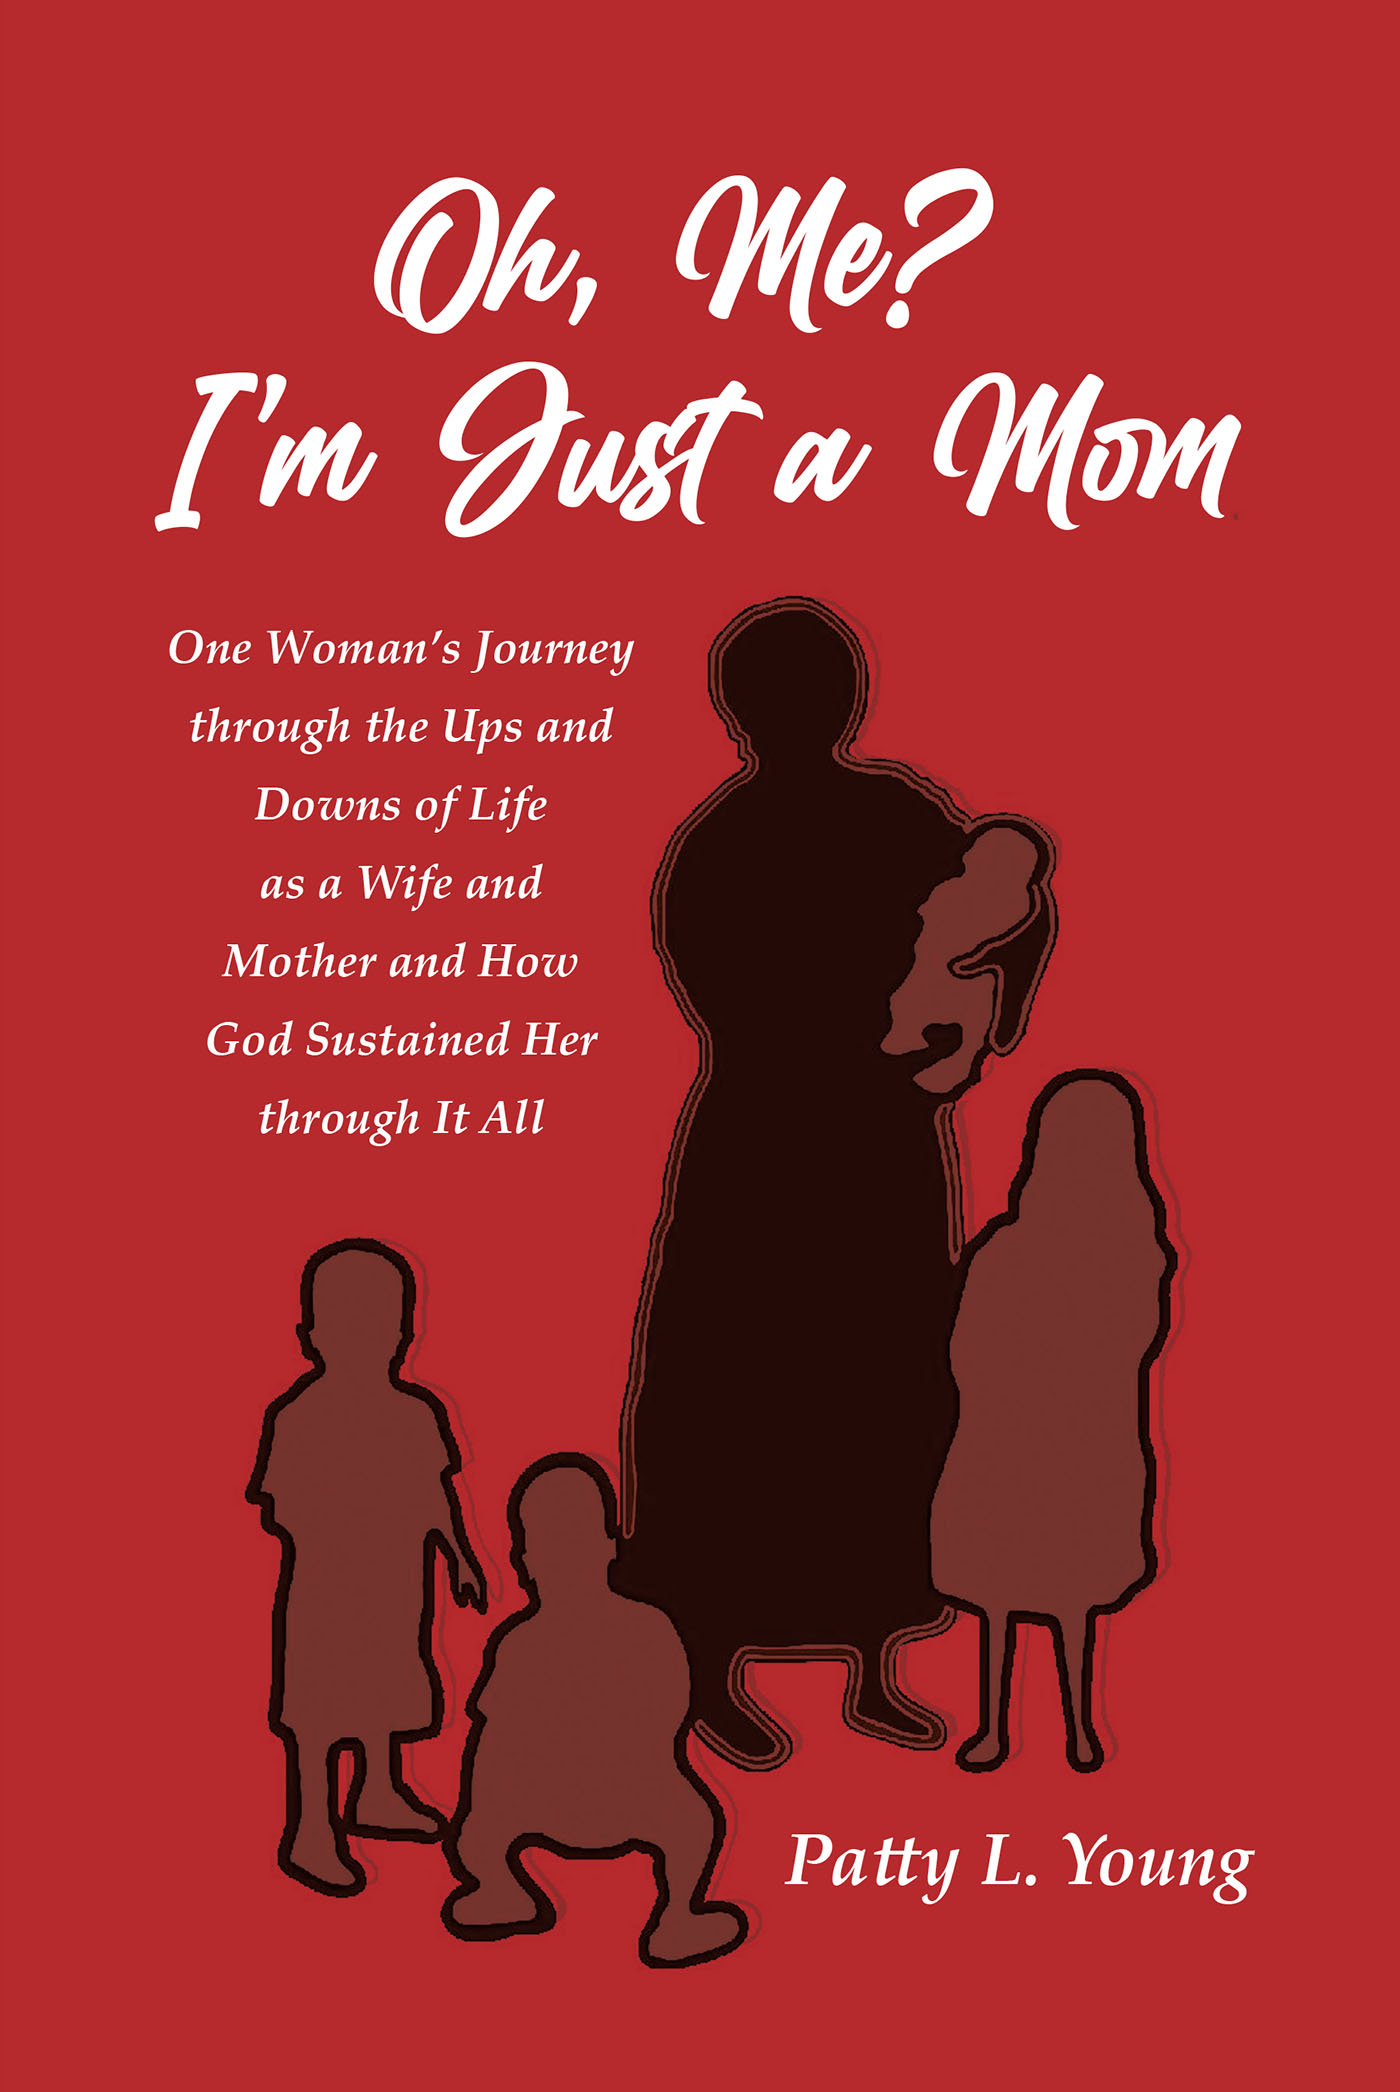 Author Patty L. Young’s New Book, "Oh, Me? I’m Just a Mom," Explores the Author's Relationship with Motherhood and God as She Experience the Trials and Triumphs of Life